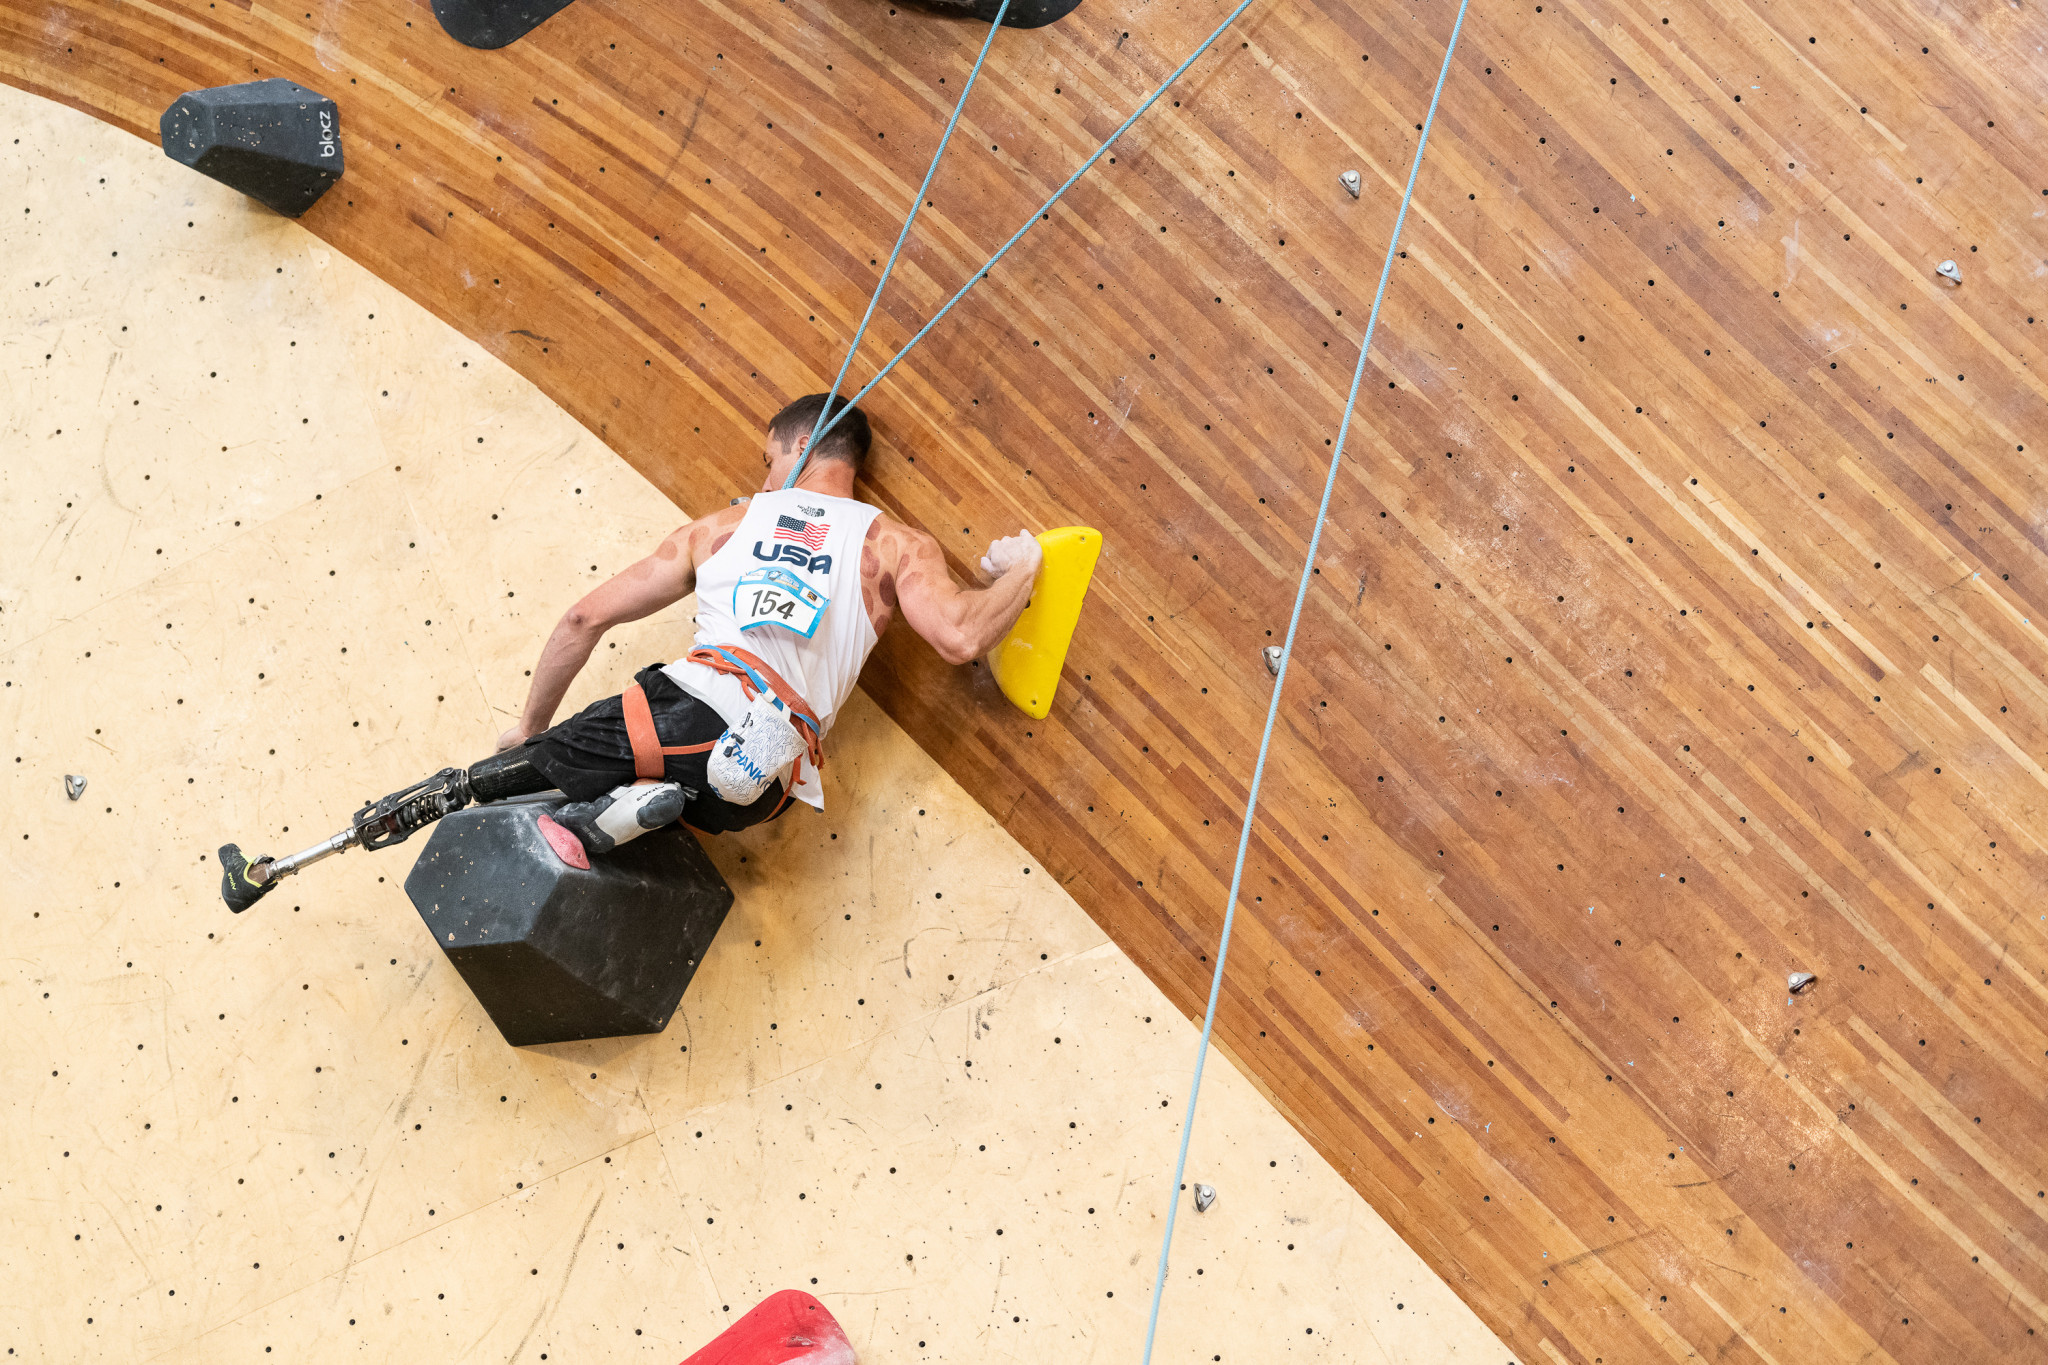 Climbing is hoping to be added to the Paralympic programme in time for LA 2028 ©IFSC